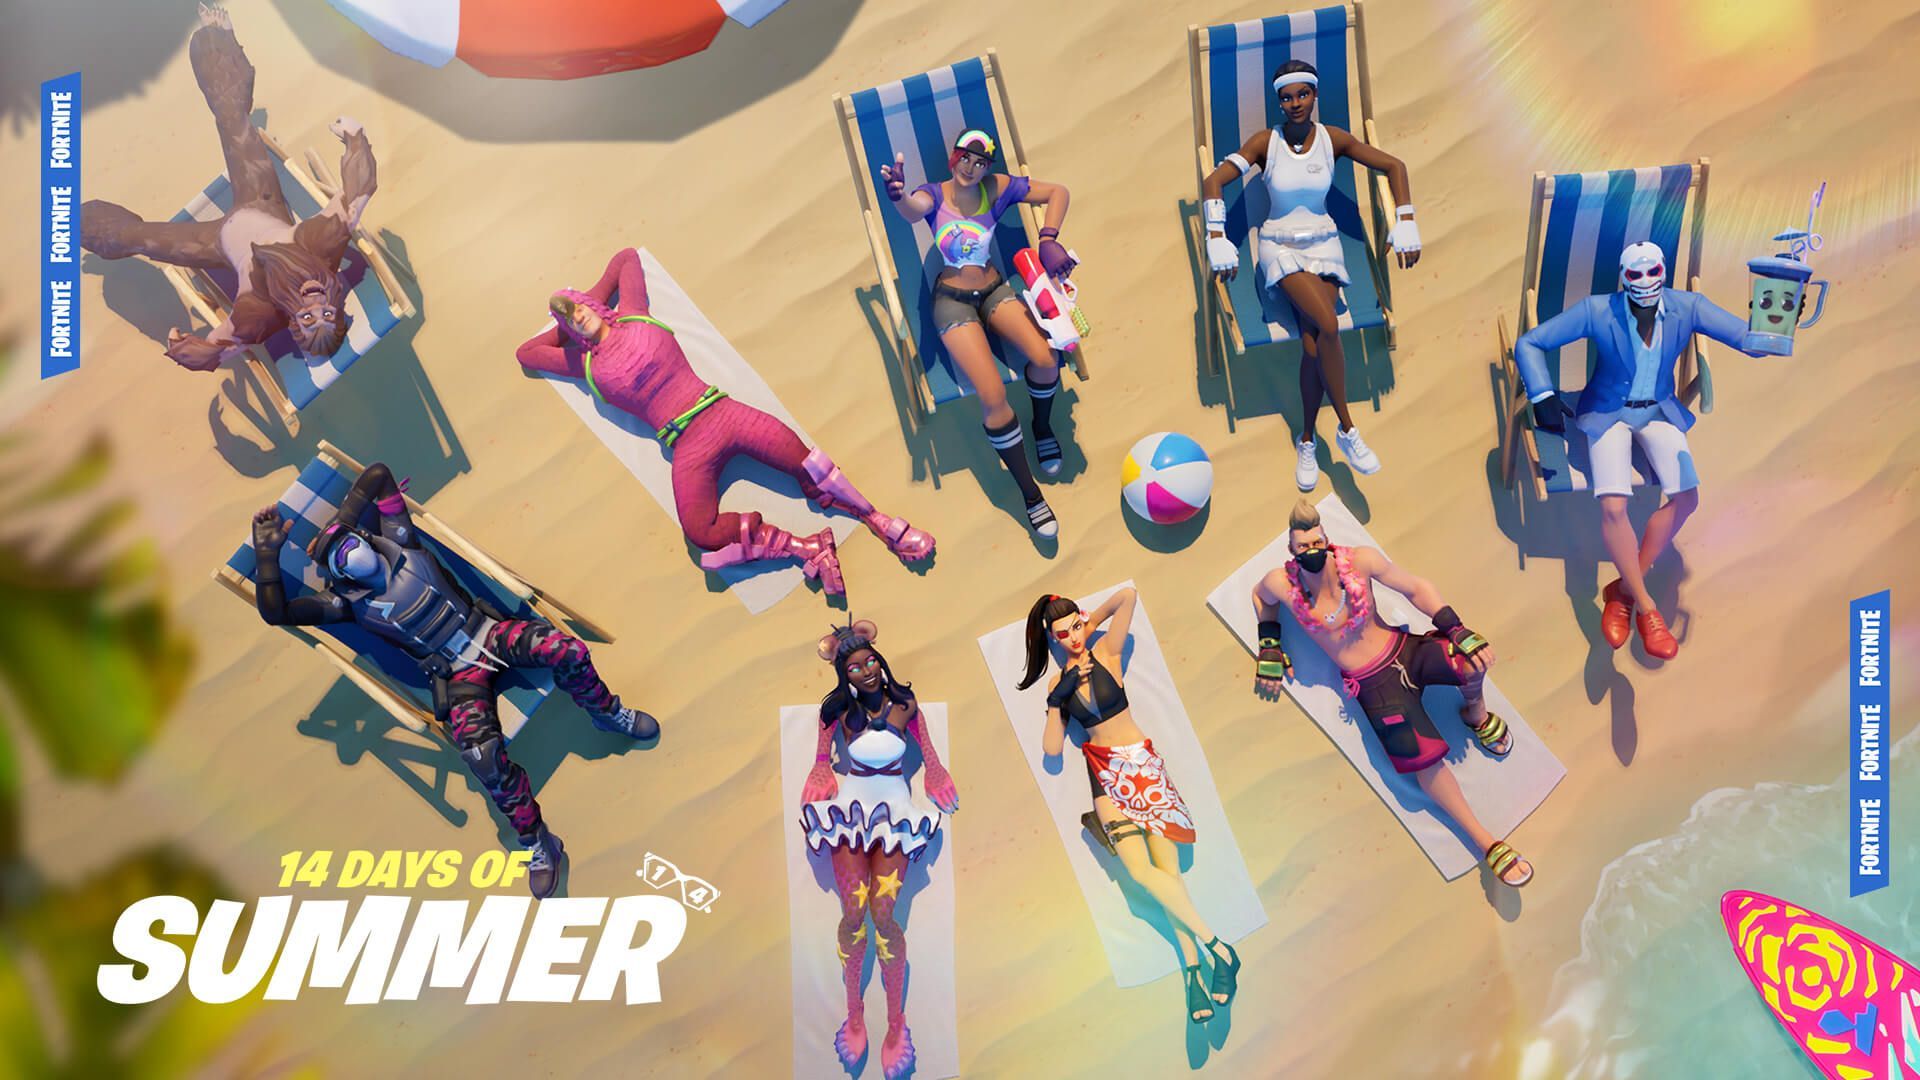 Fortnite's 14 Days of Summer event is a definite treat for fans